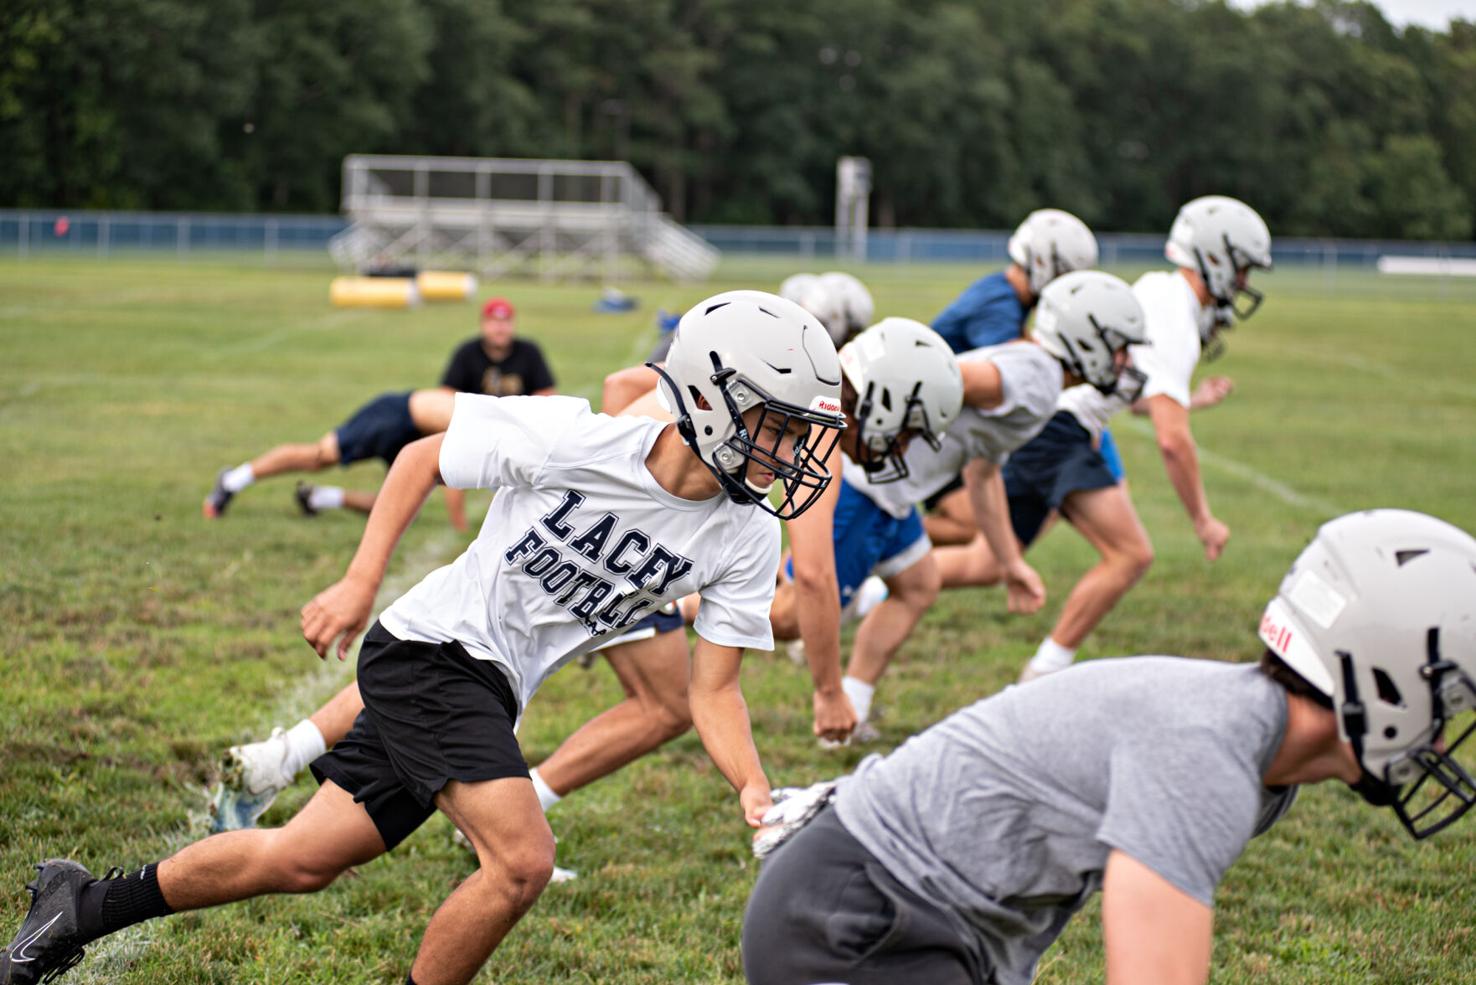 GALLERY Lacey prepares for the high school football season